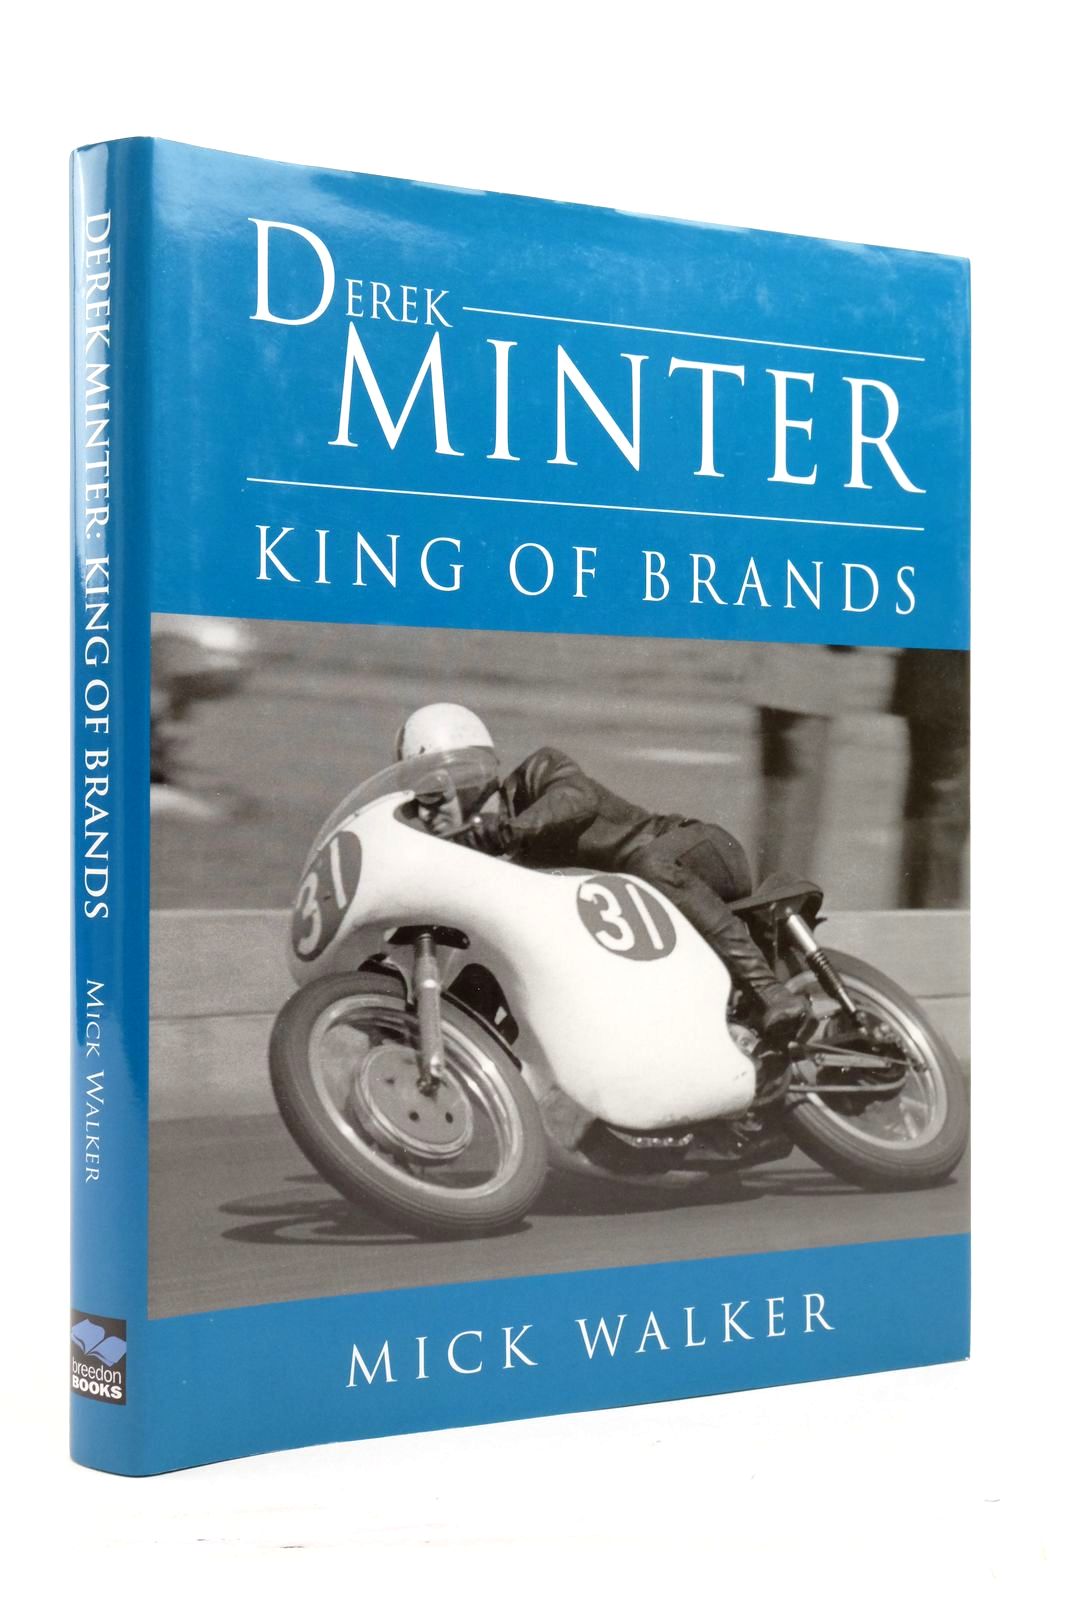 Photo of DEREK MINTER KING OF BRANDS written by Walker, Mick published by Breedon Books Publishing Co. (STOCK CODE: 2137523)  for sale by Stella & Rose's Books